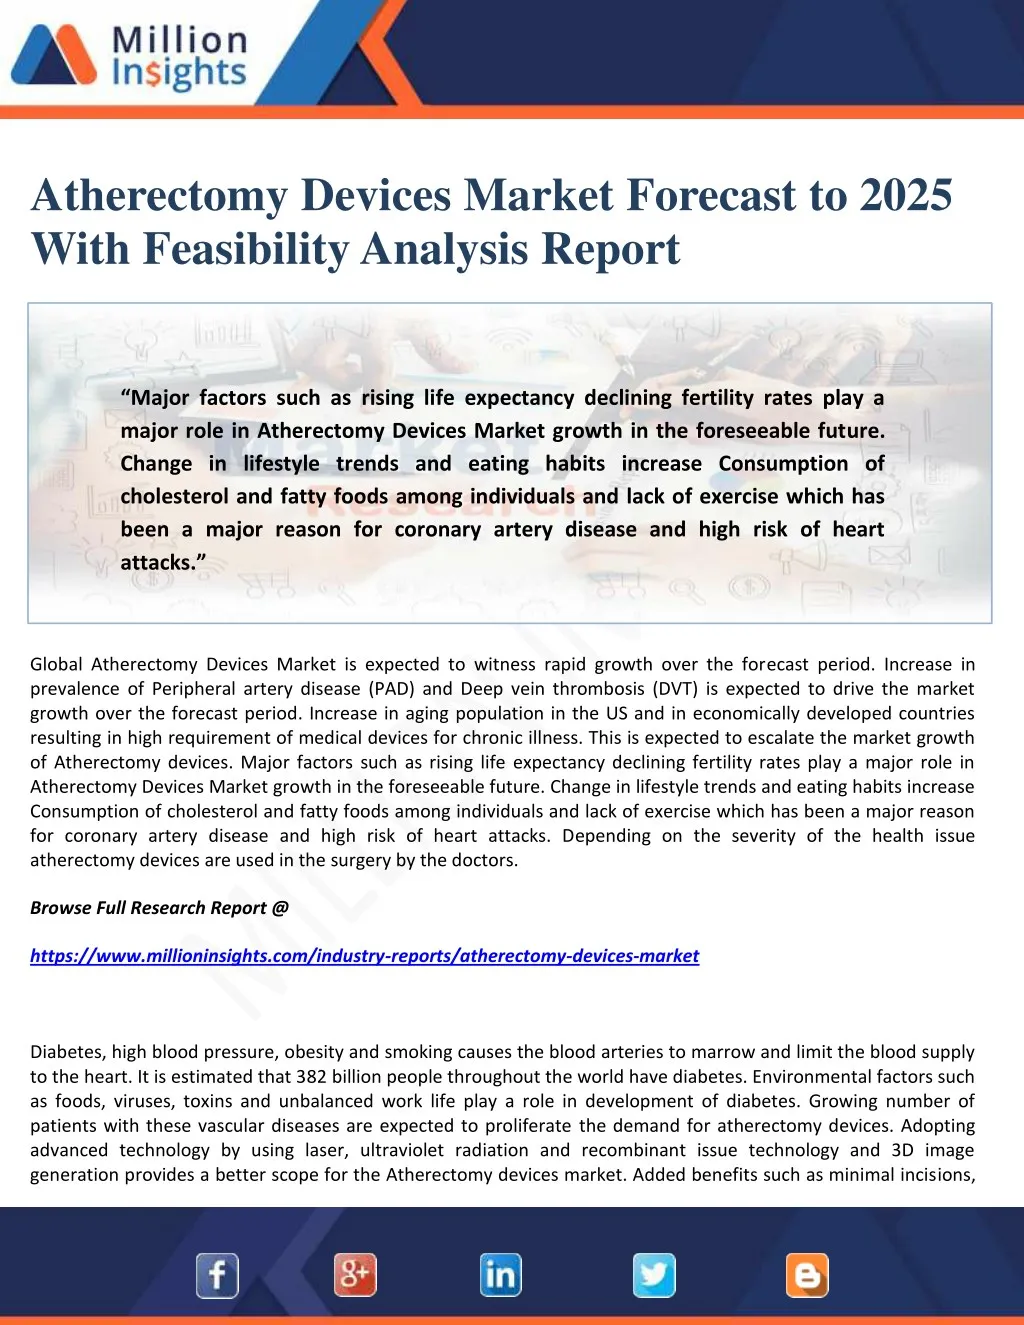 atherectomy devices market forecast to 2025 with